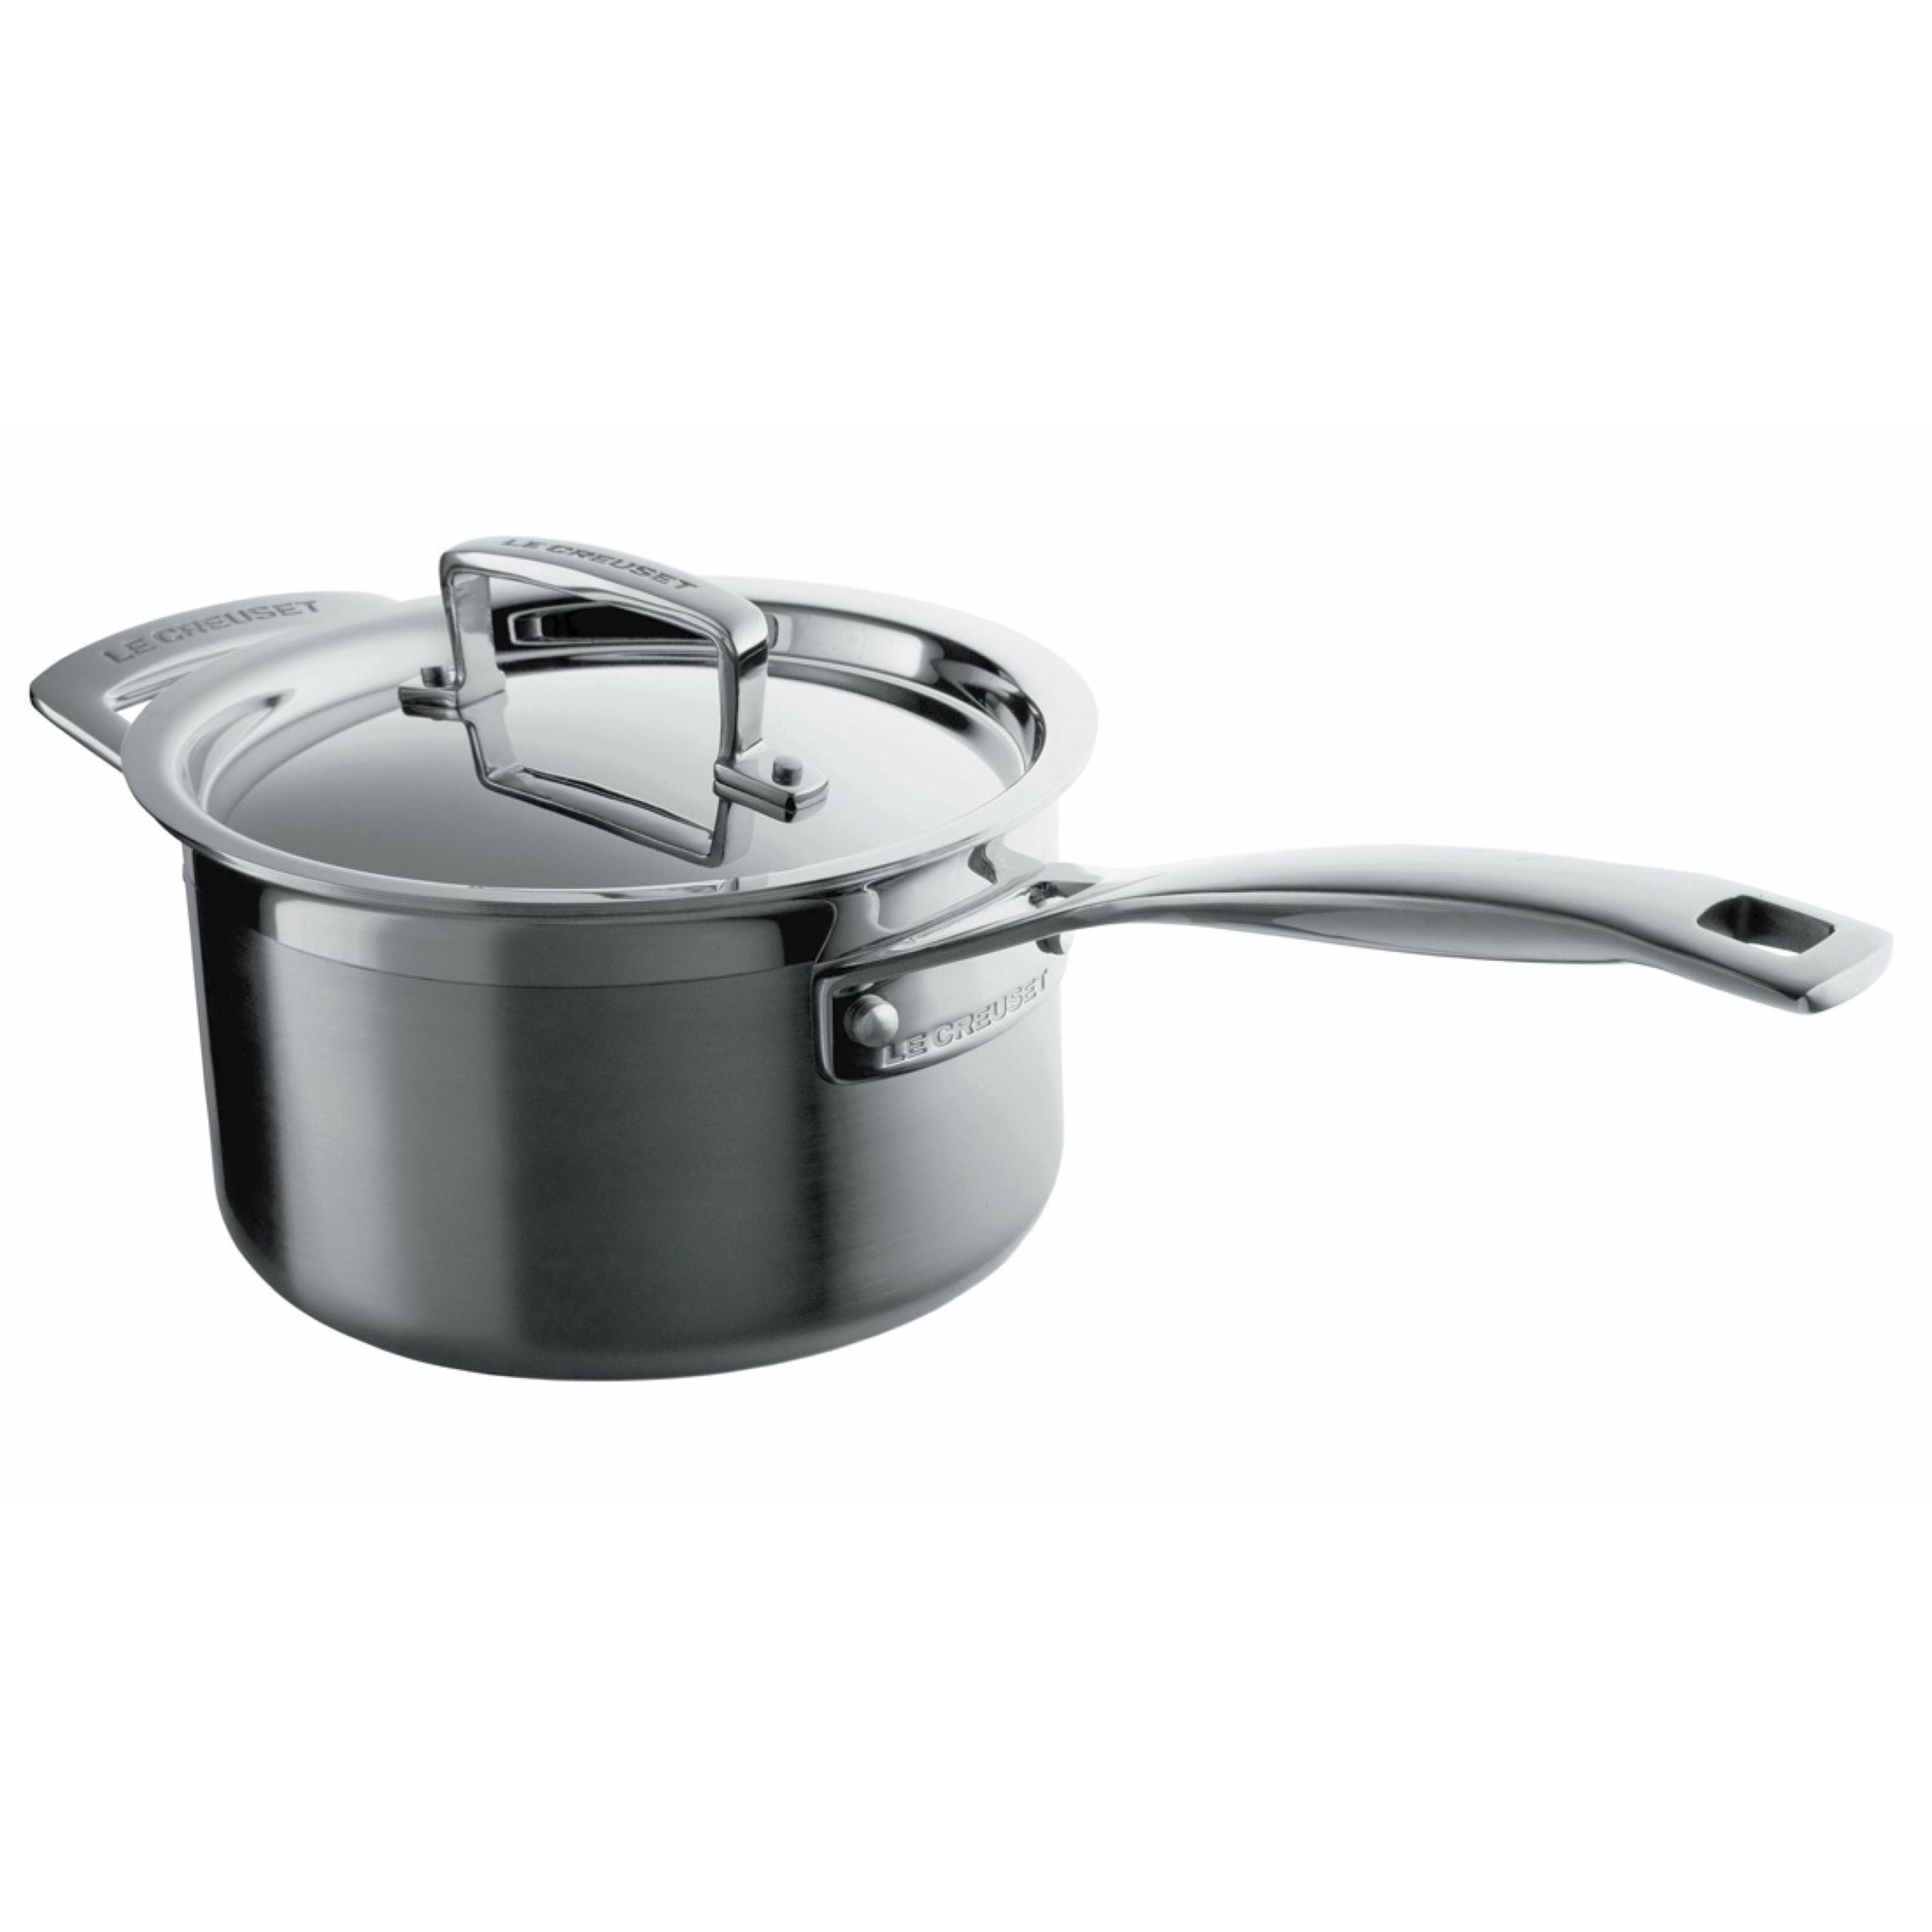 Le Creuset 3 Ply Stainless Steel Saucepan With Lid 1.9 L, 16 Cm